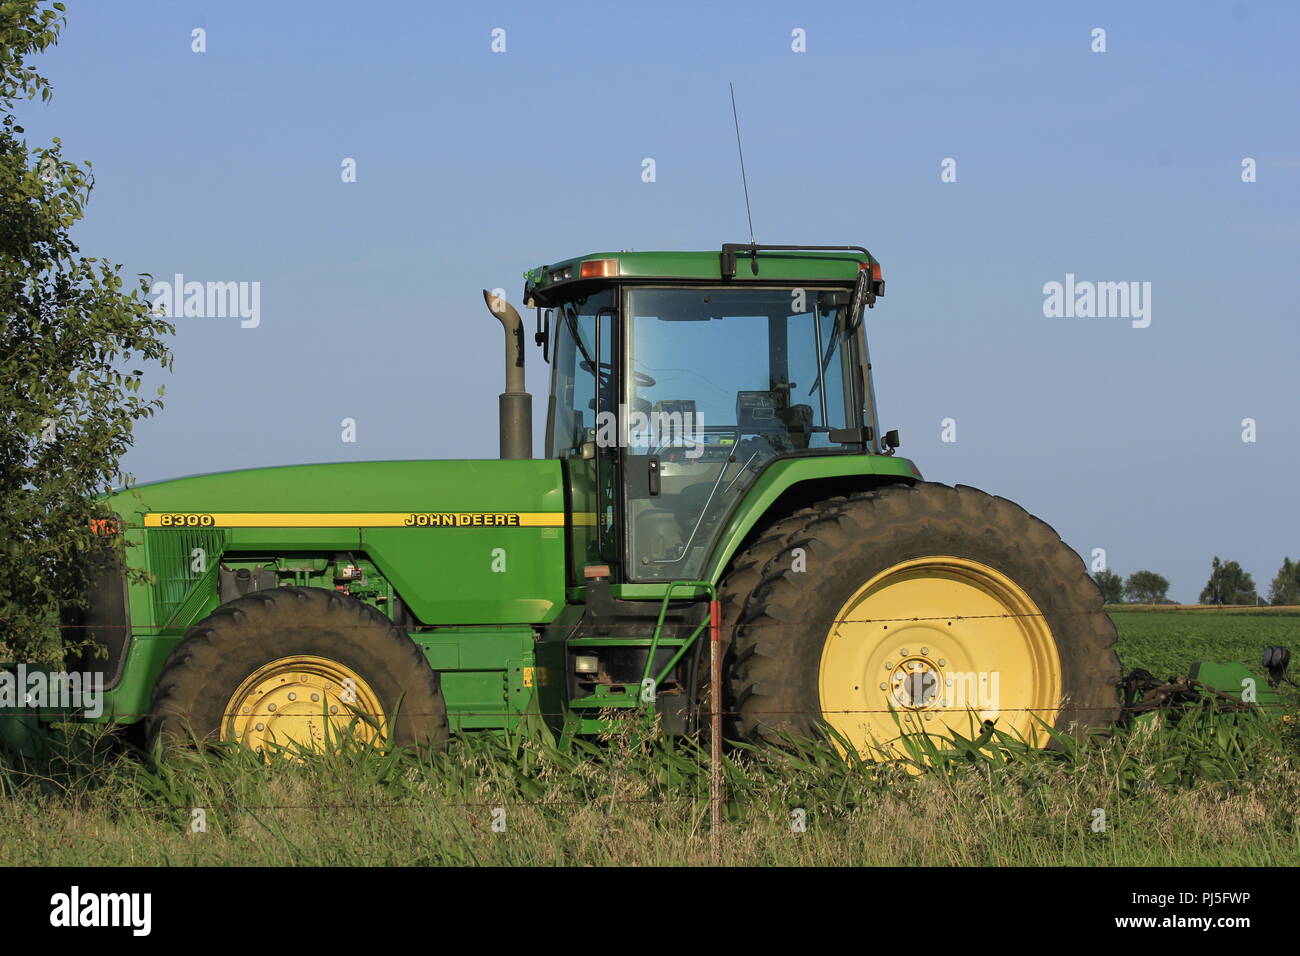 Green John Deere Tractor in a Field with a fence and blue sky. Stock Photo